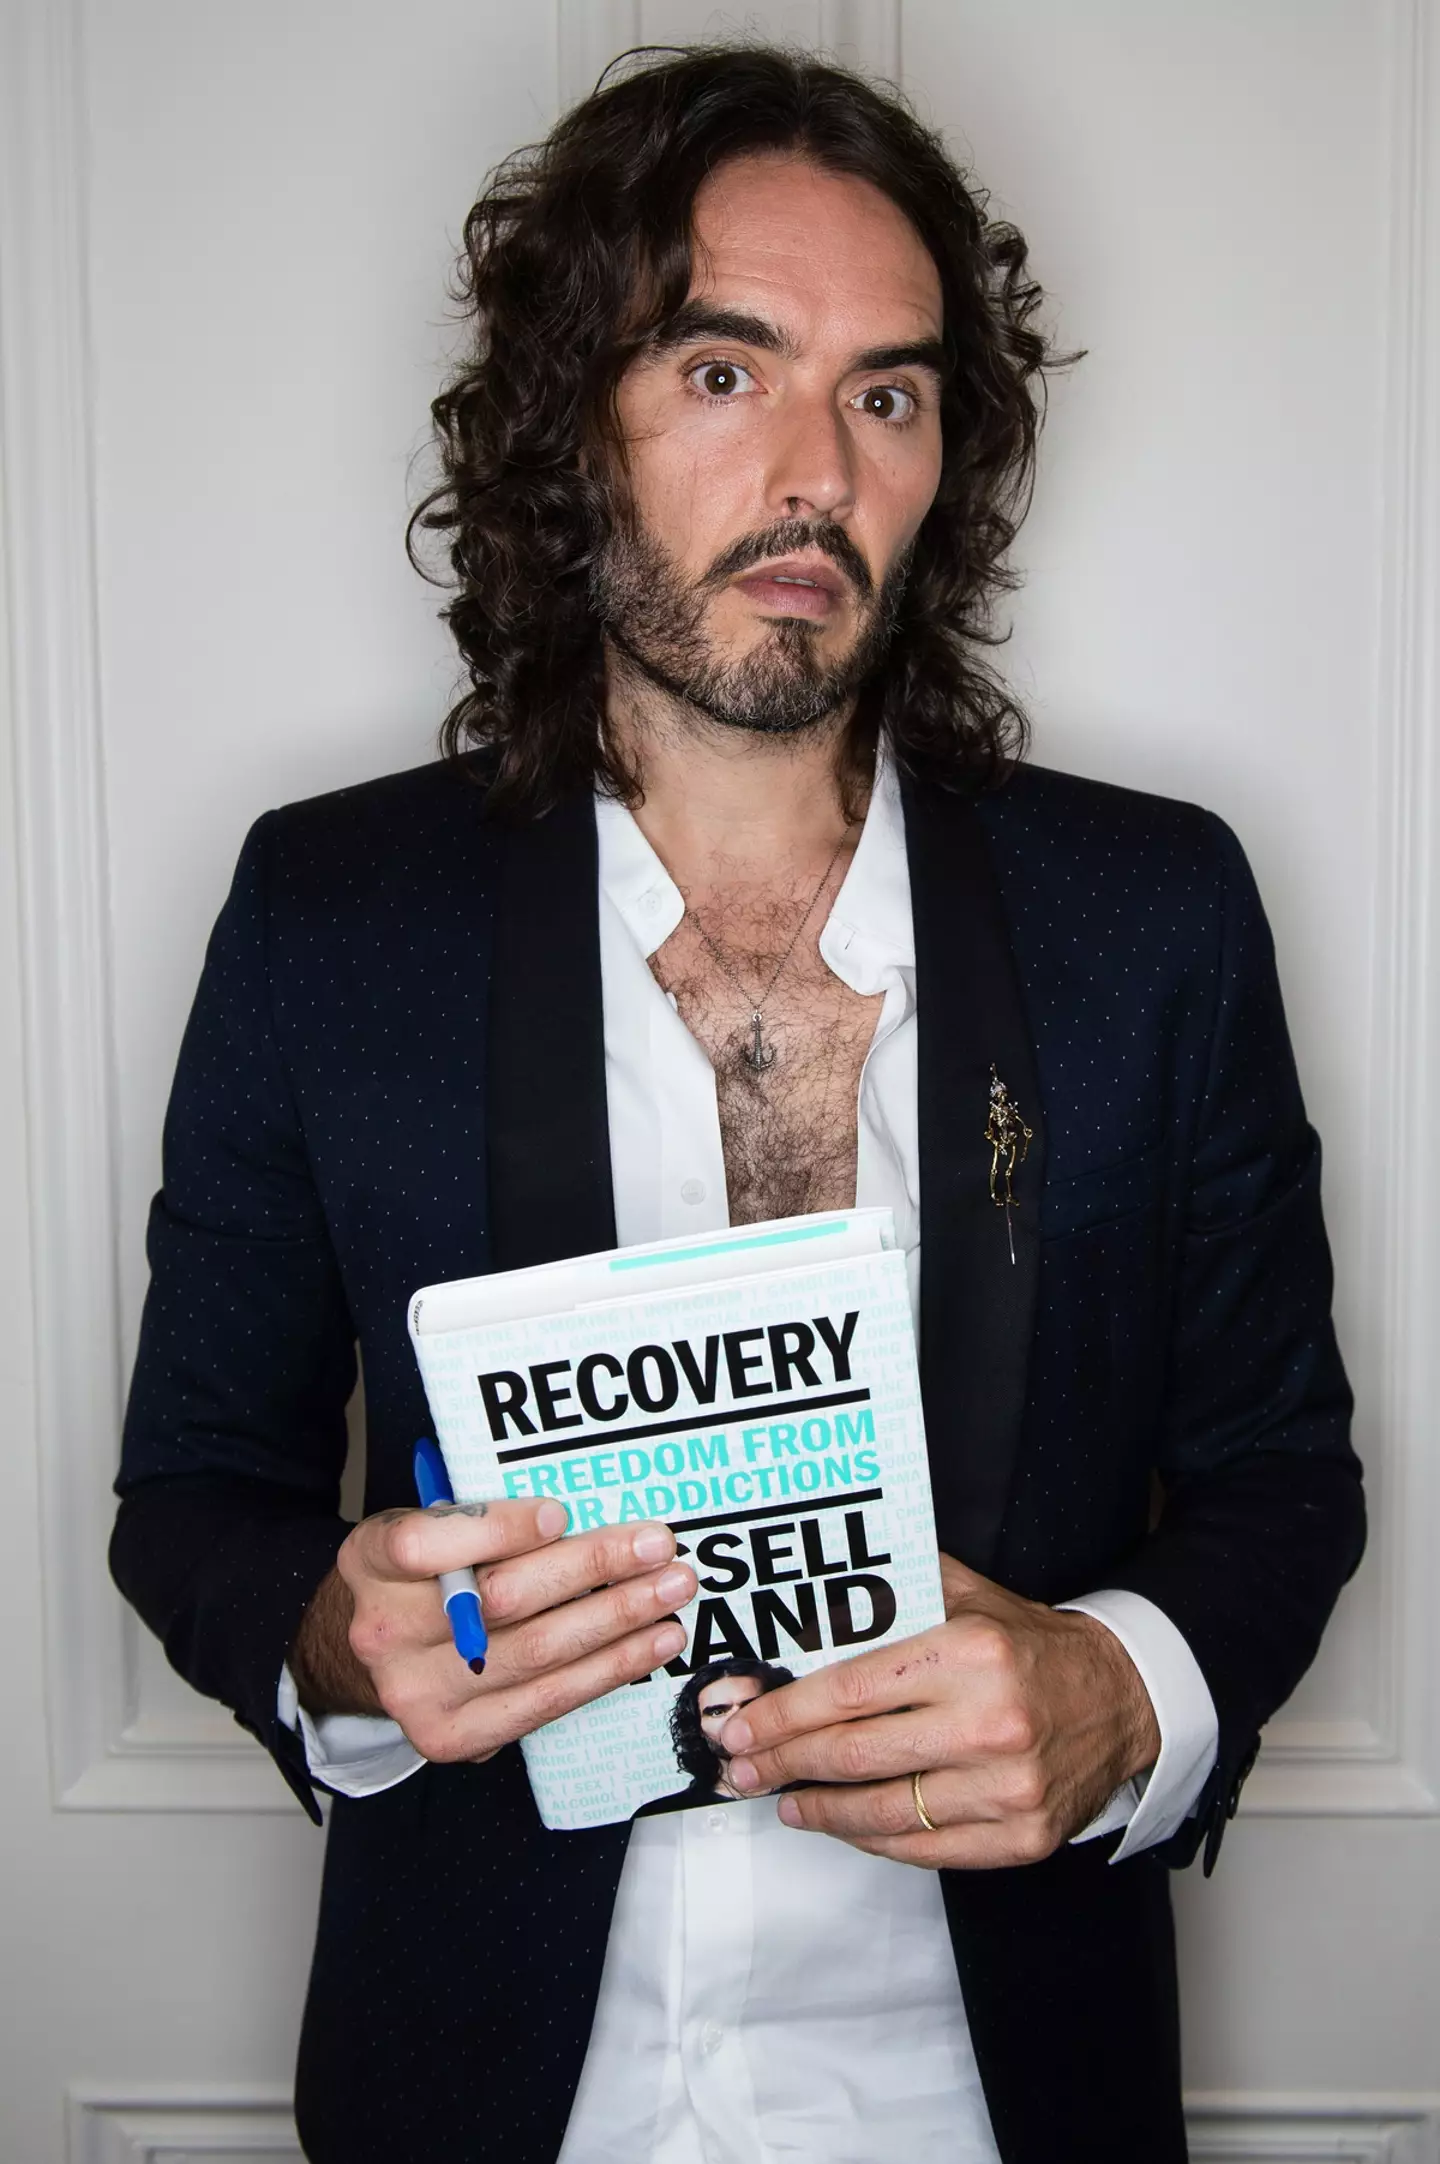 Russell Brand has denied the allegations made against him.